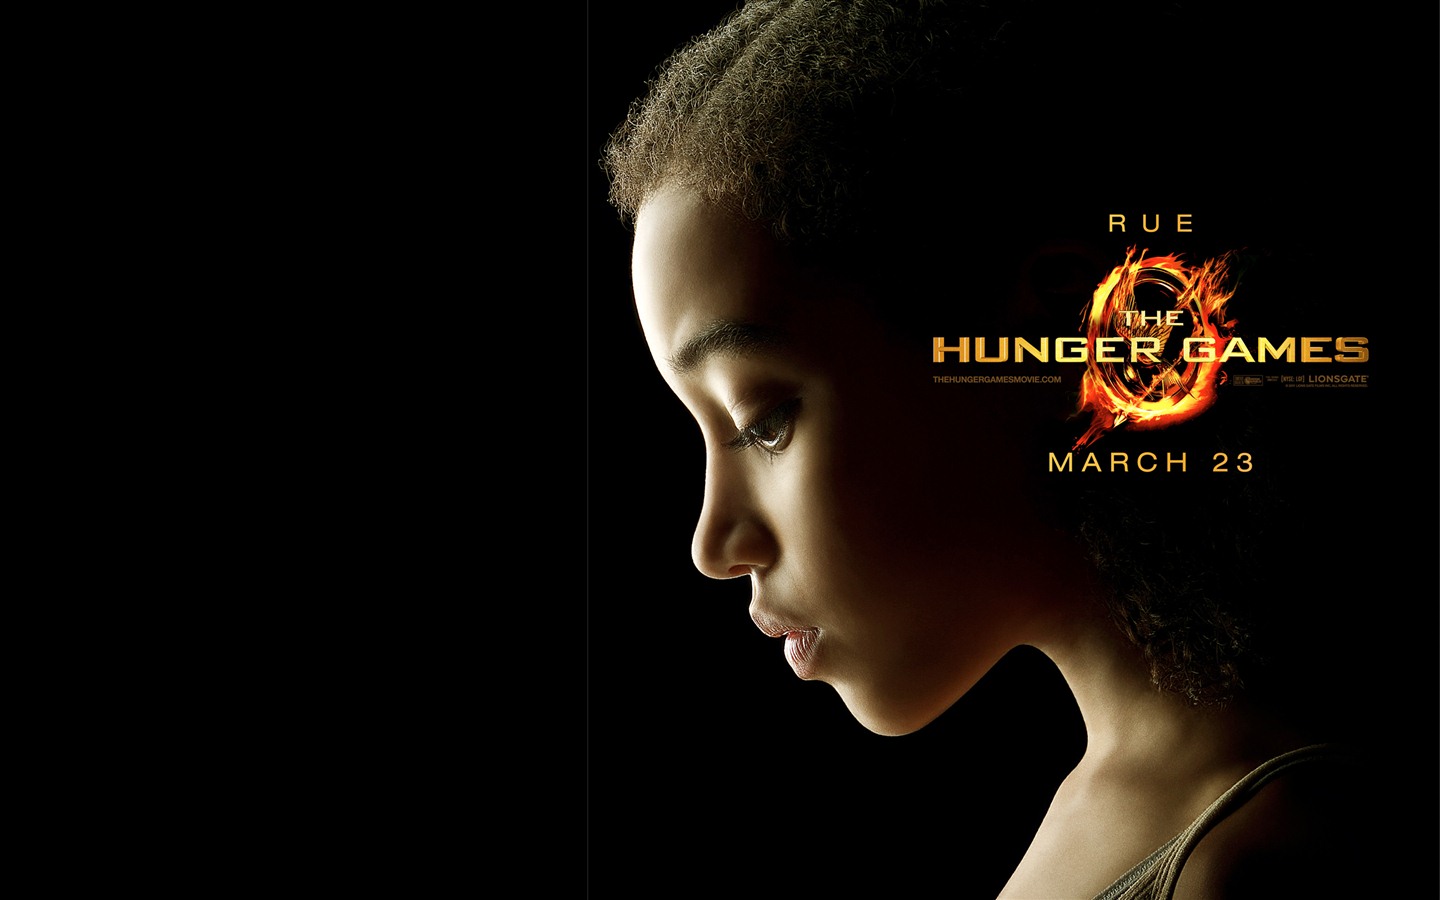 The Hunger Games HD wallpapers #2 - 1440x900